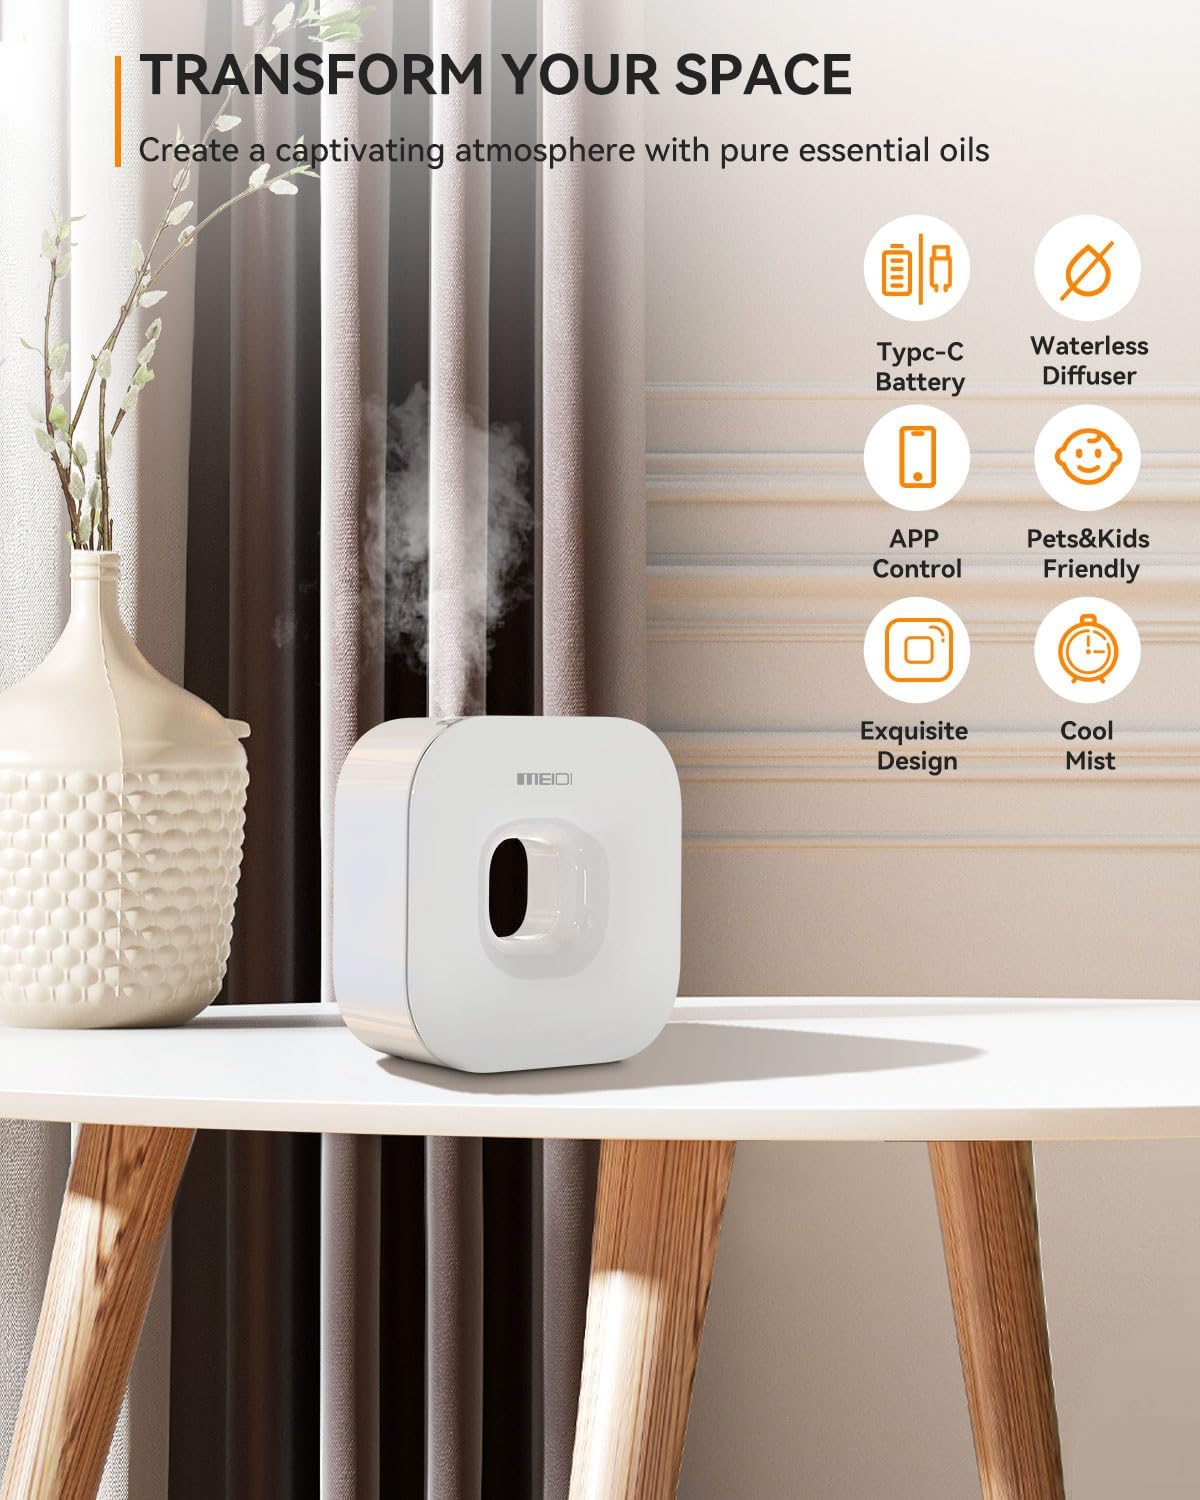 MEIDI Waterless Essential Oil Diffuser - Bluetooth Cordless Aromatherapy Diffuser with App Control, Smart Timer Setting, H